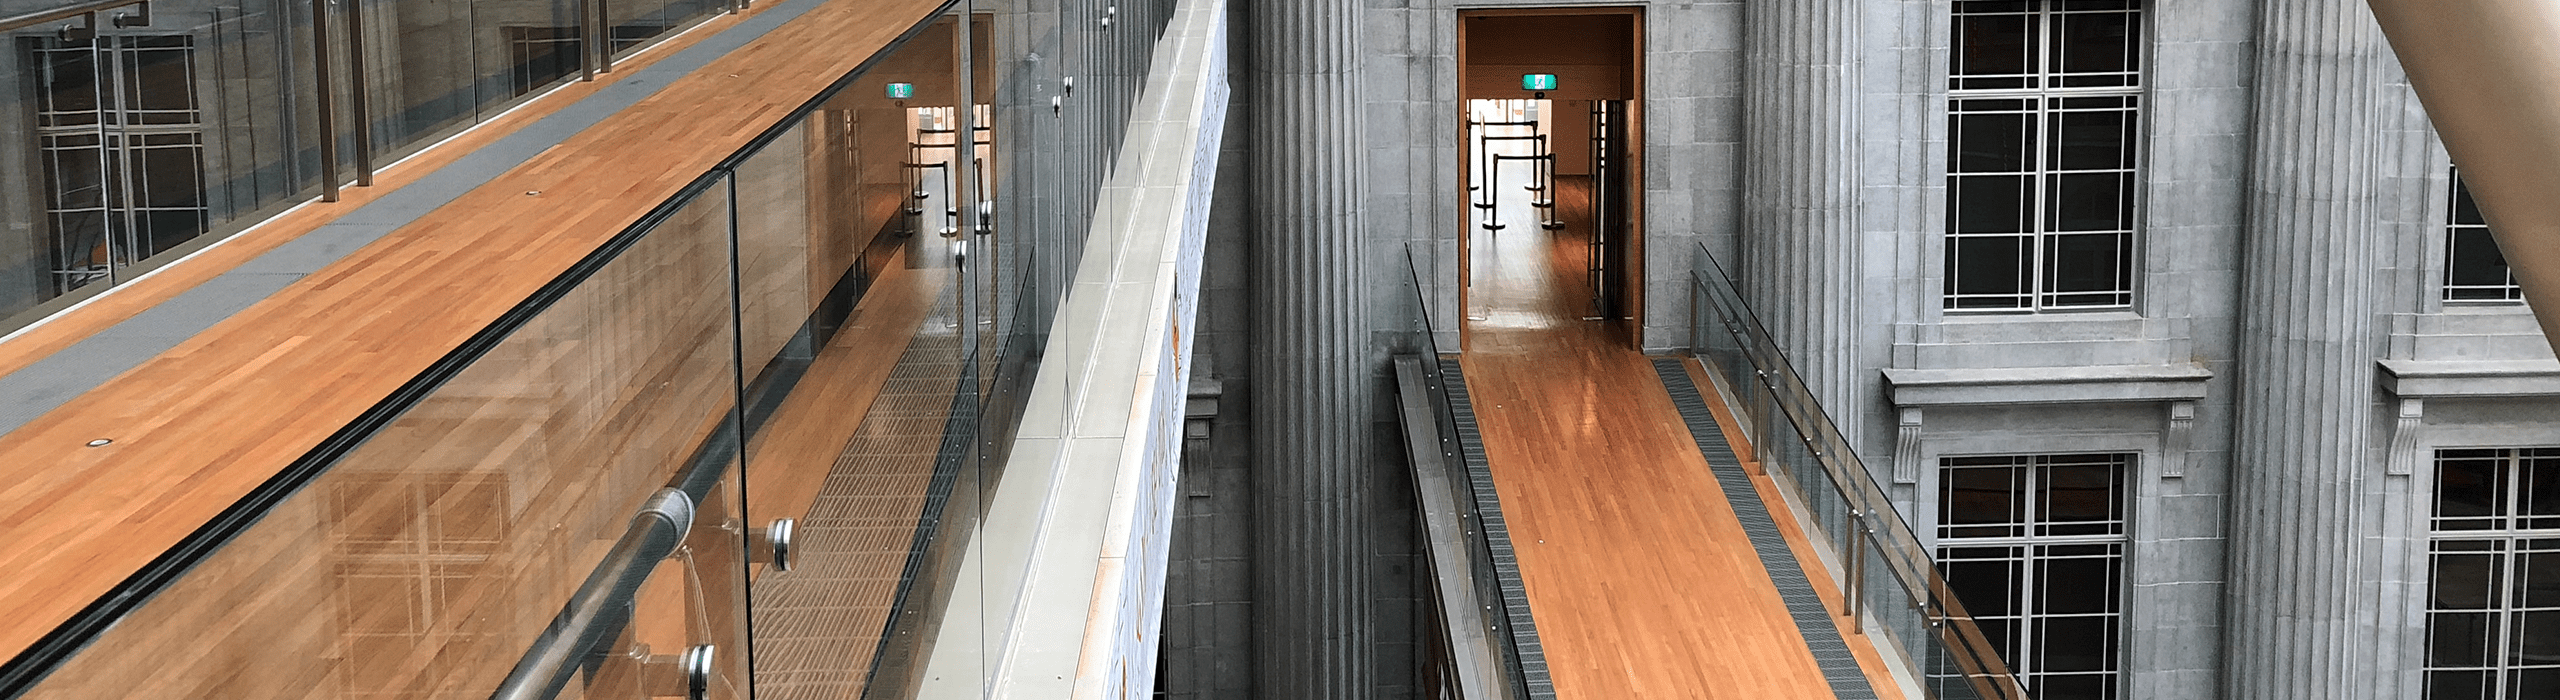 Glass Railings in Commercial Spaces: Safety Meets Aesthetics